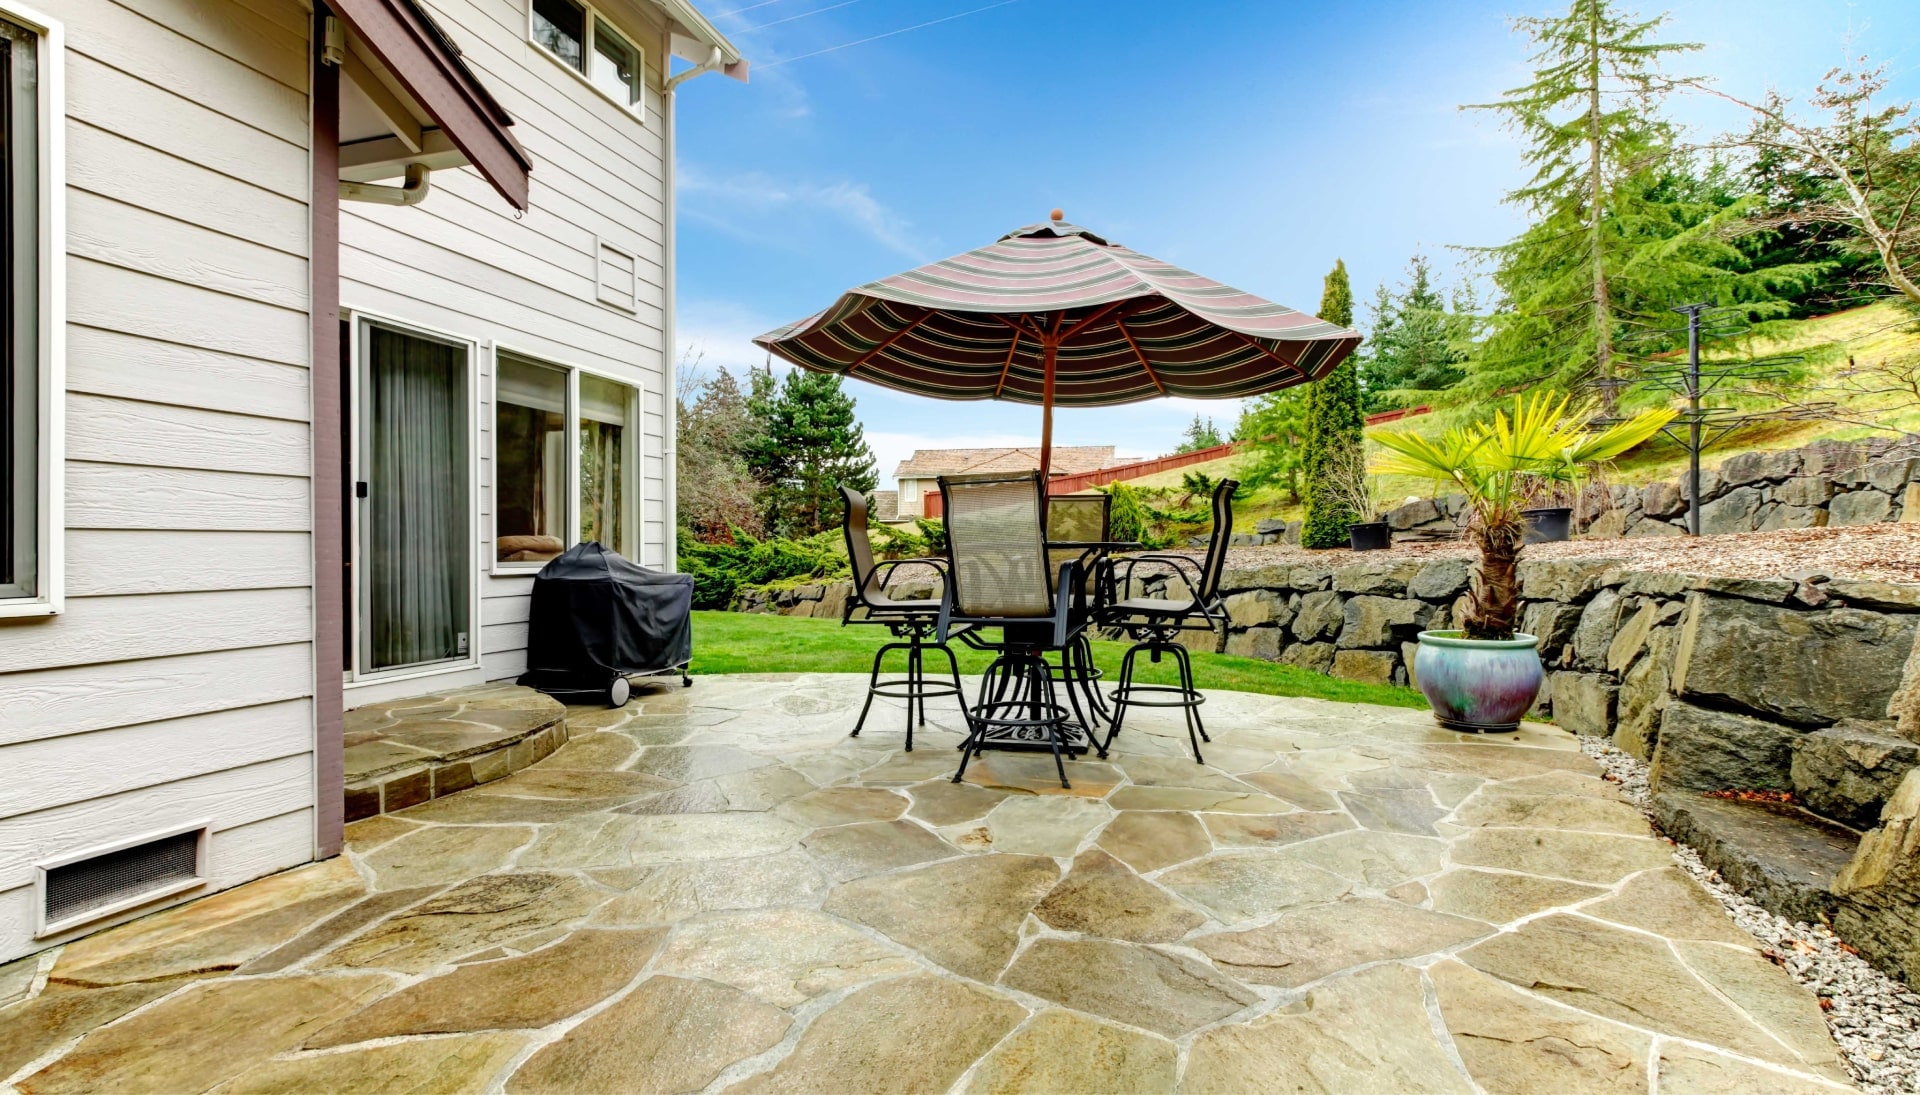 Beautifully Textured and Patterned Concrete Patios in San Jose, California area!